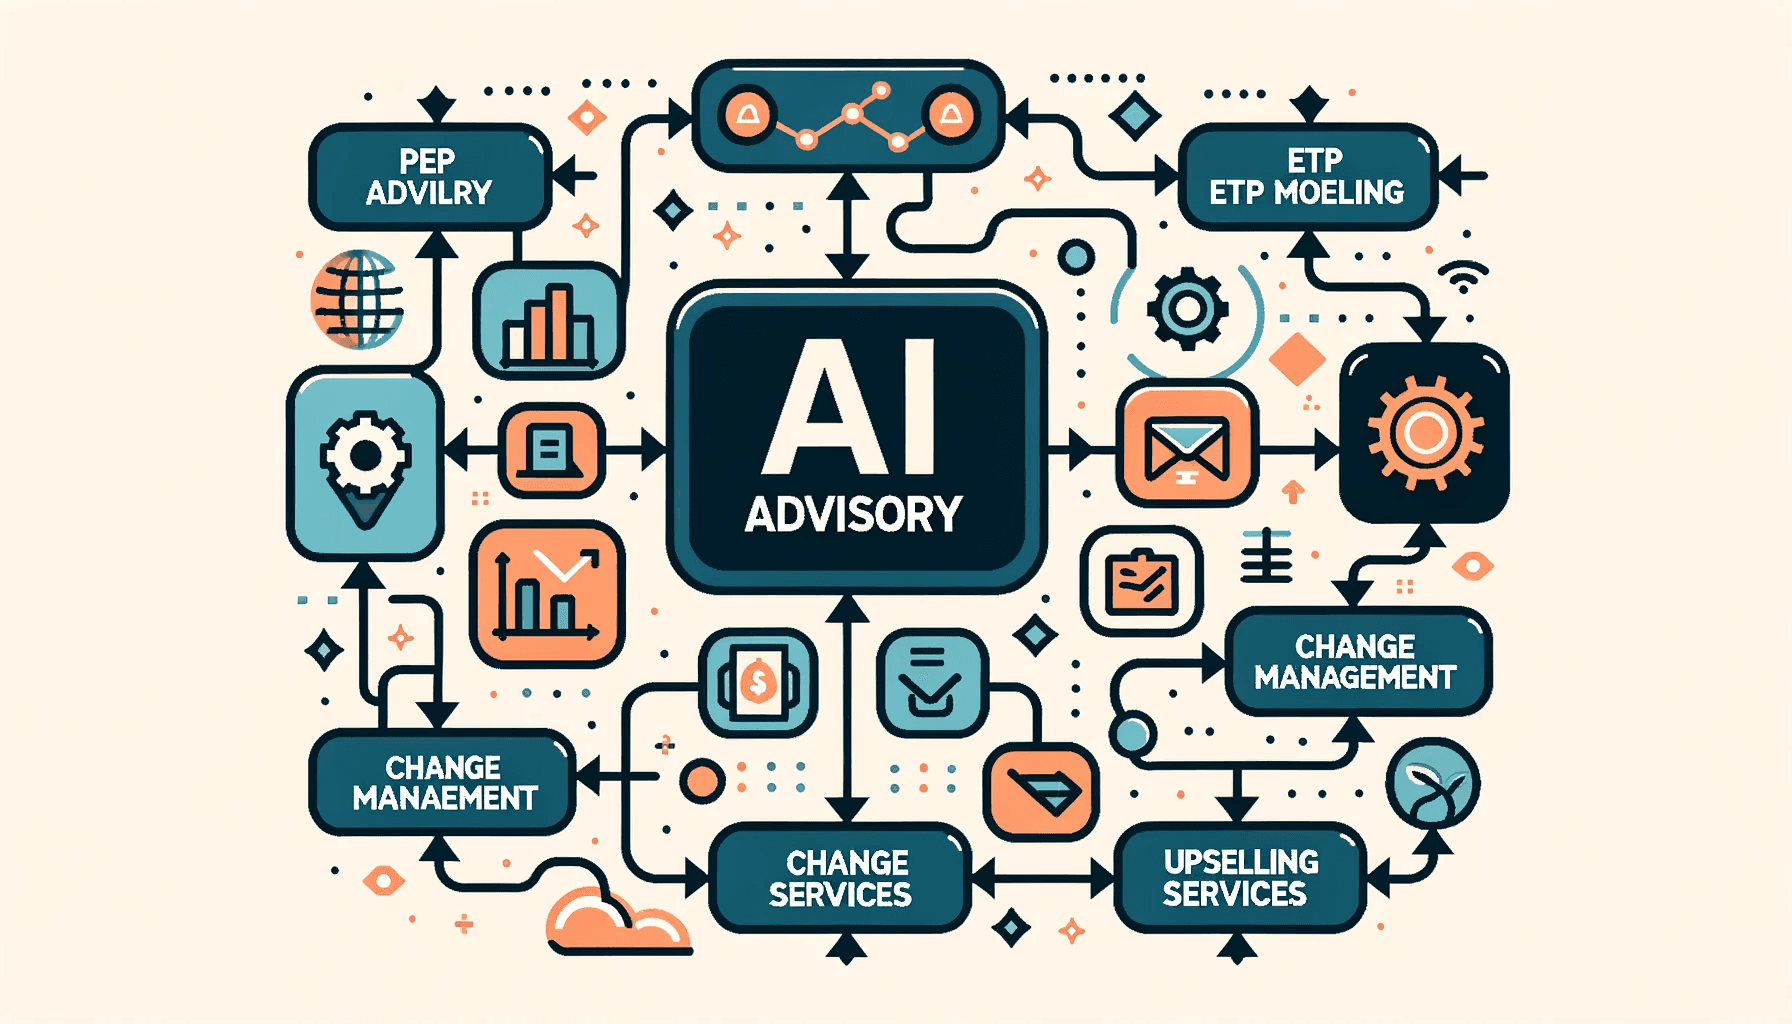 Vector graphic of a workflow diagram labeled 'AI Advisory', branching out to elements like 'PEP vs ETP modeling', 'Change Management', and 'Upselling Services'.